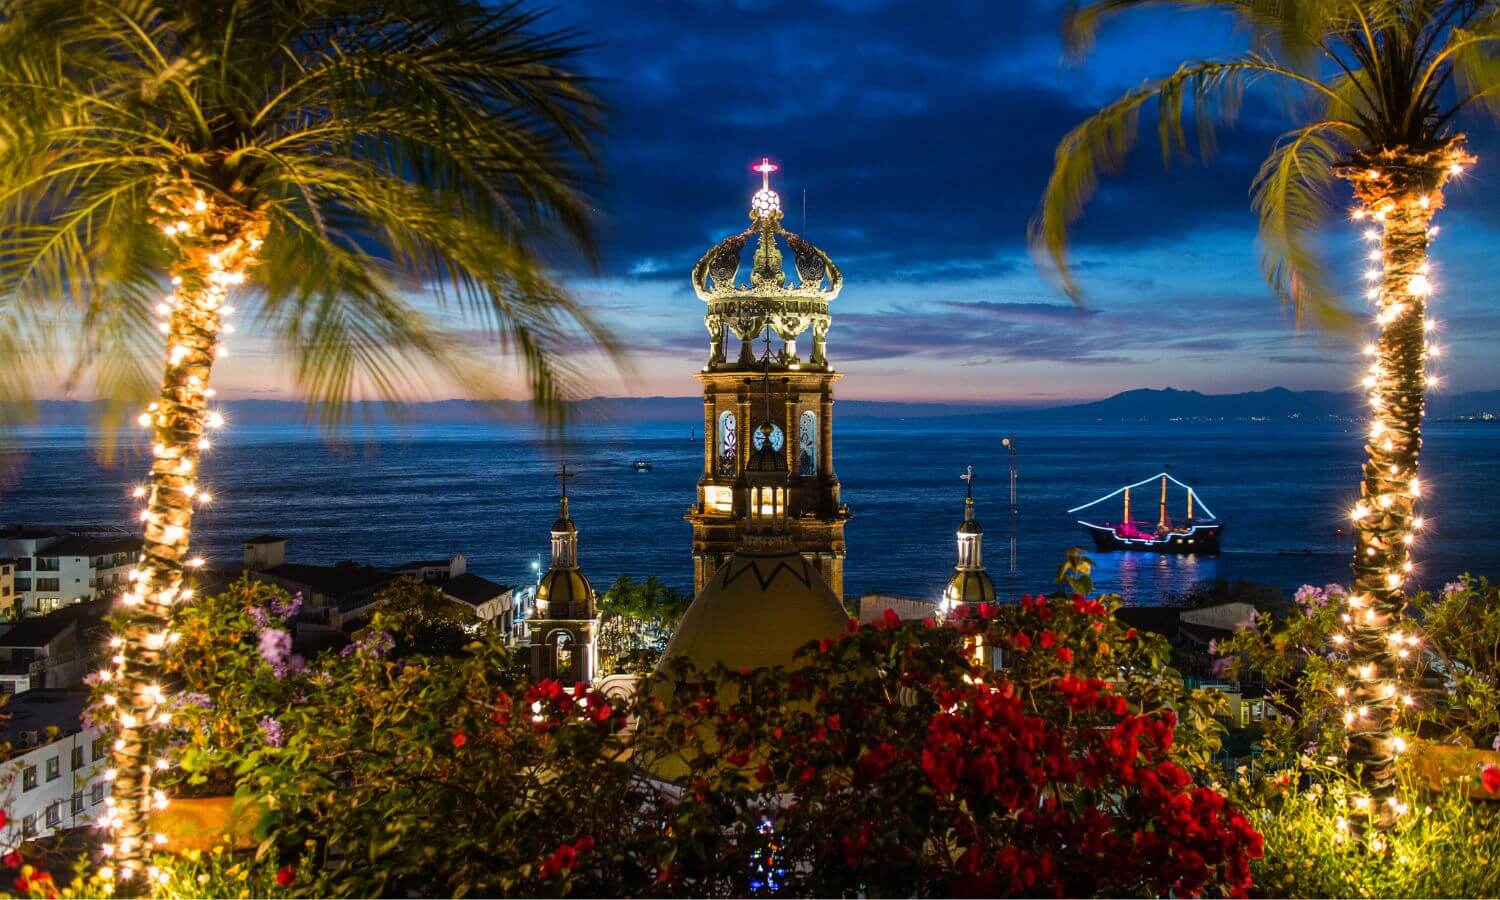 Christmas Decorations on palm trees at night looking over the ocean in Mexico